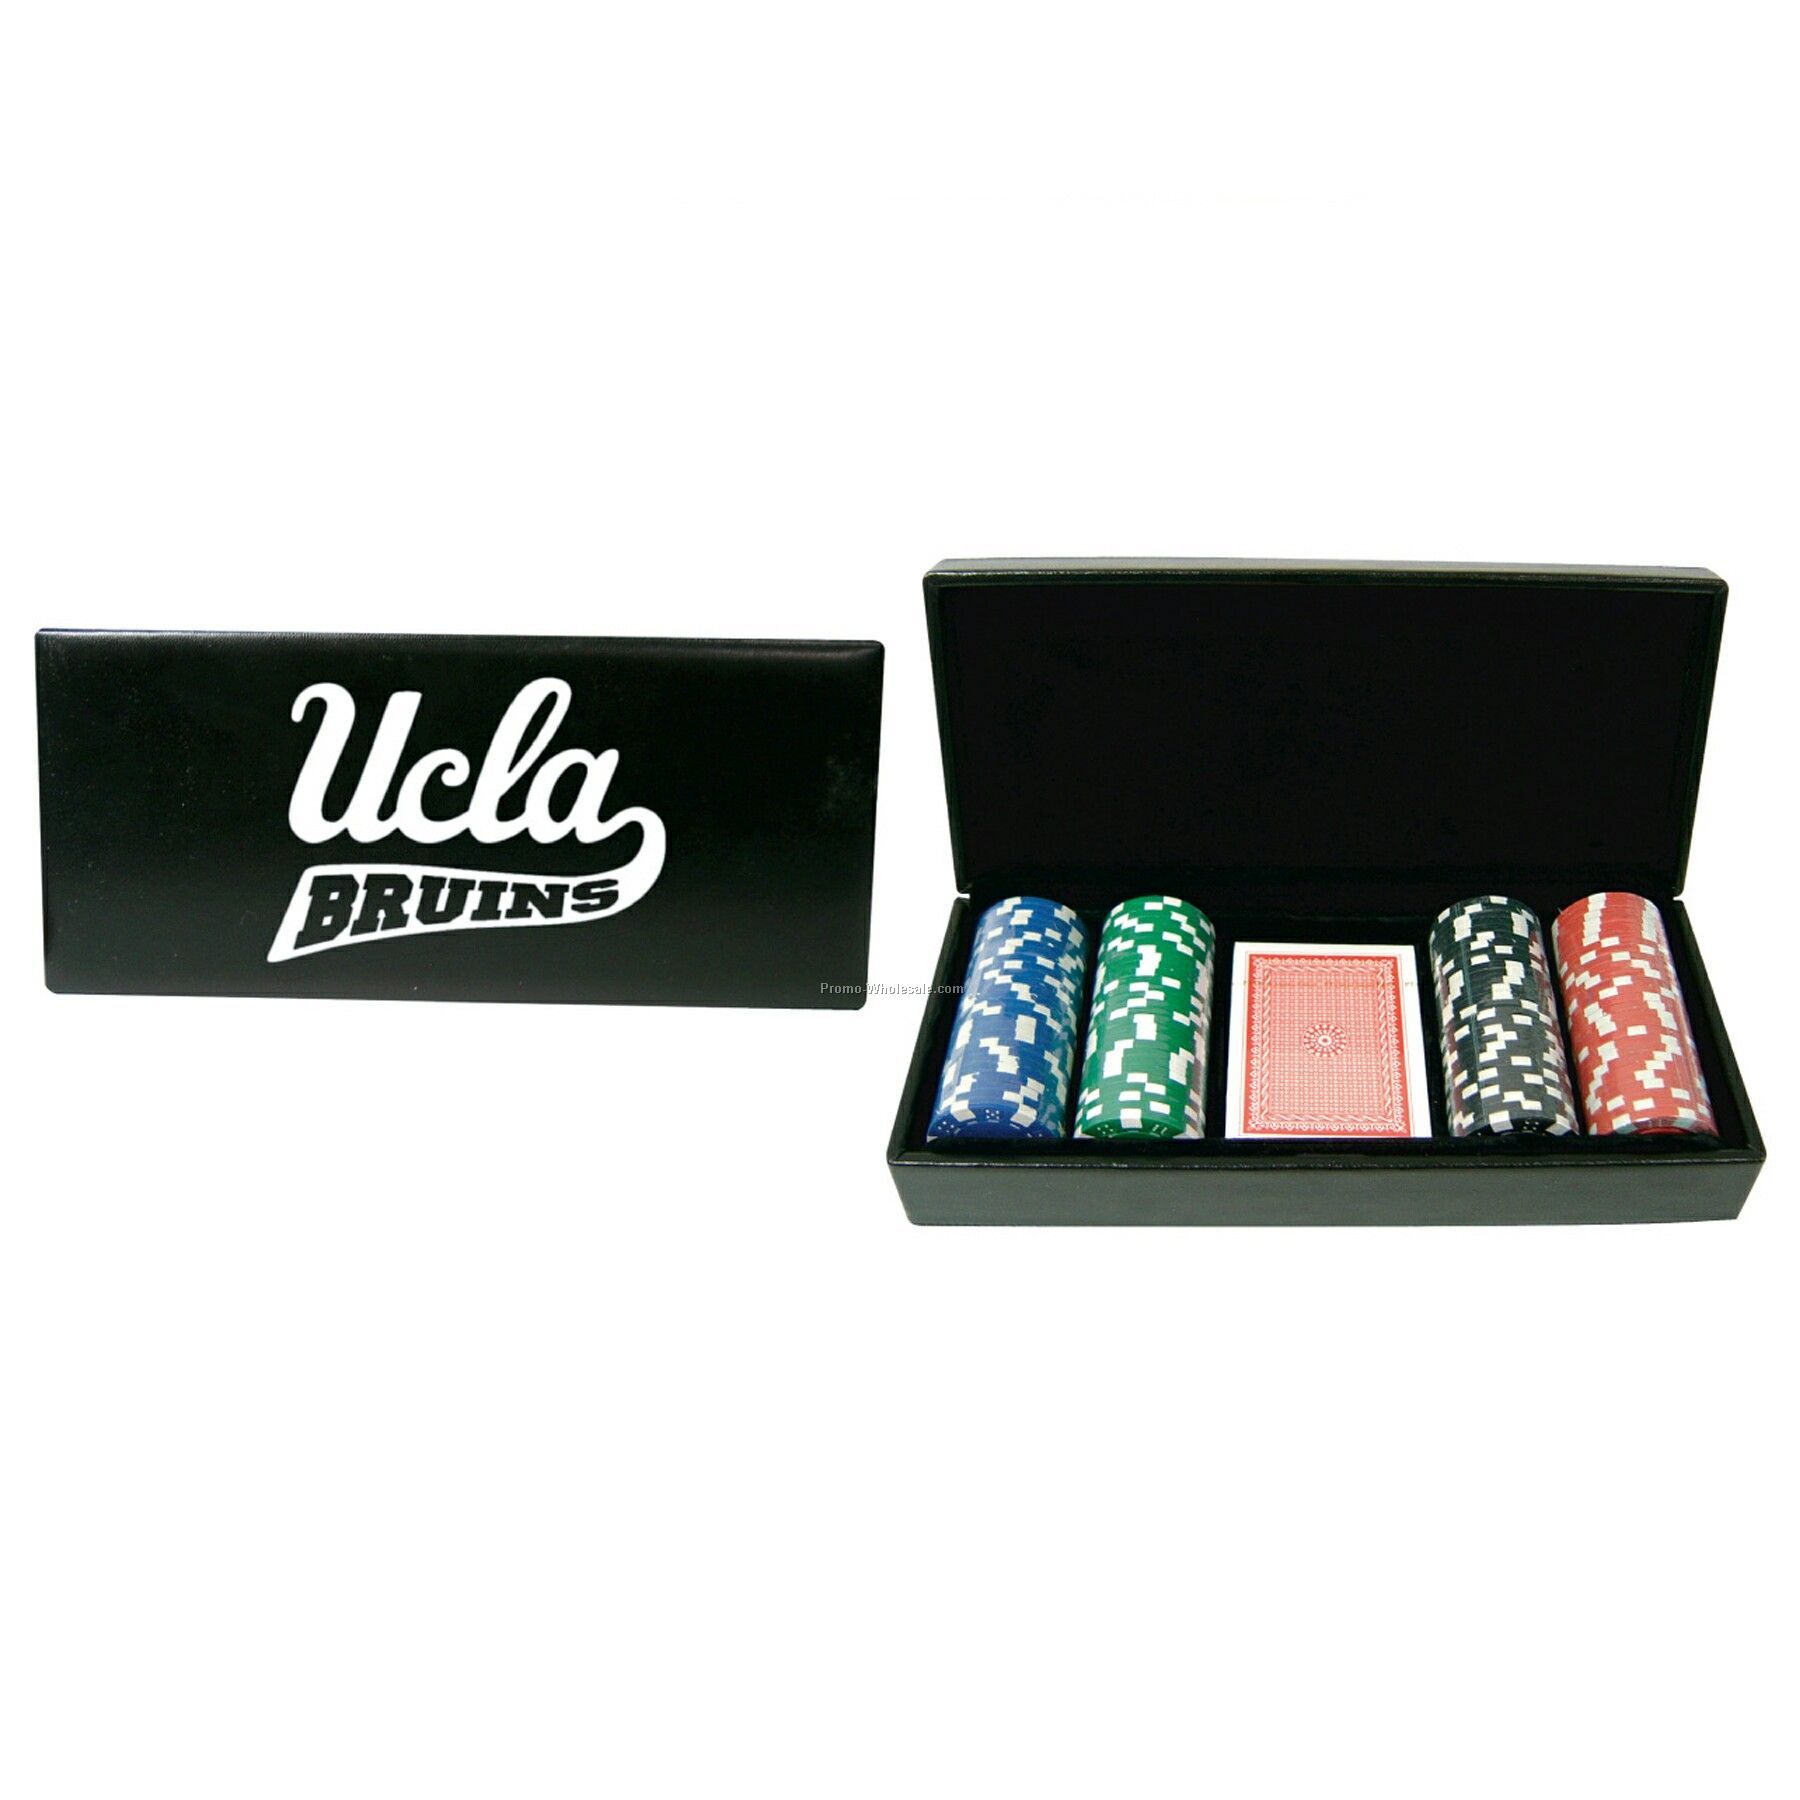 100 Pieces Poker Chip Set With Vinyl Case - Blank